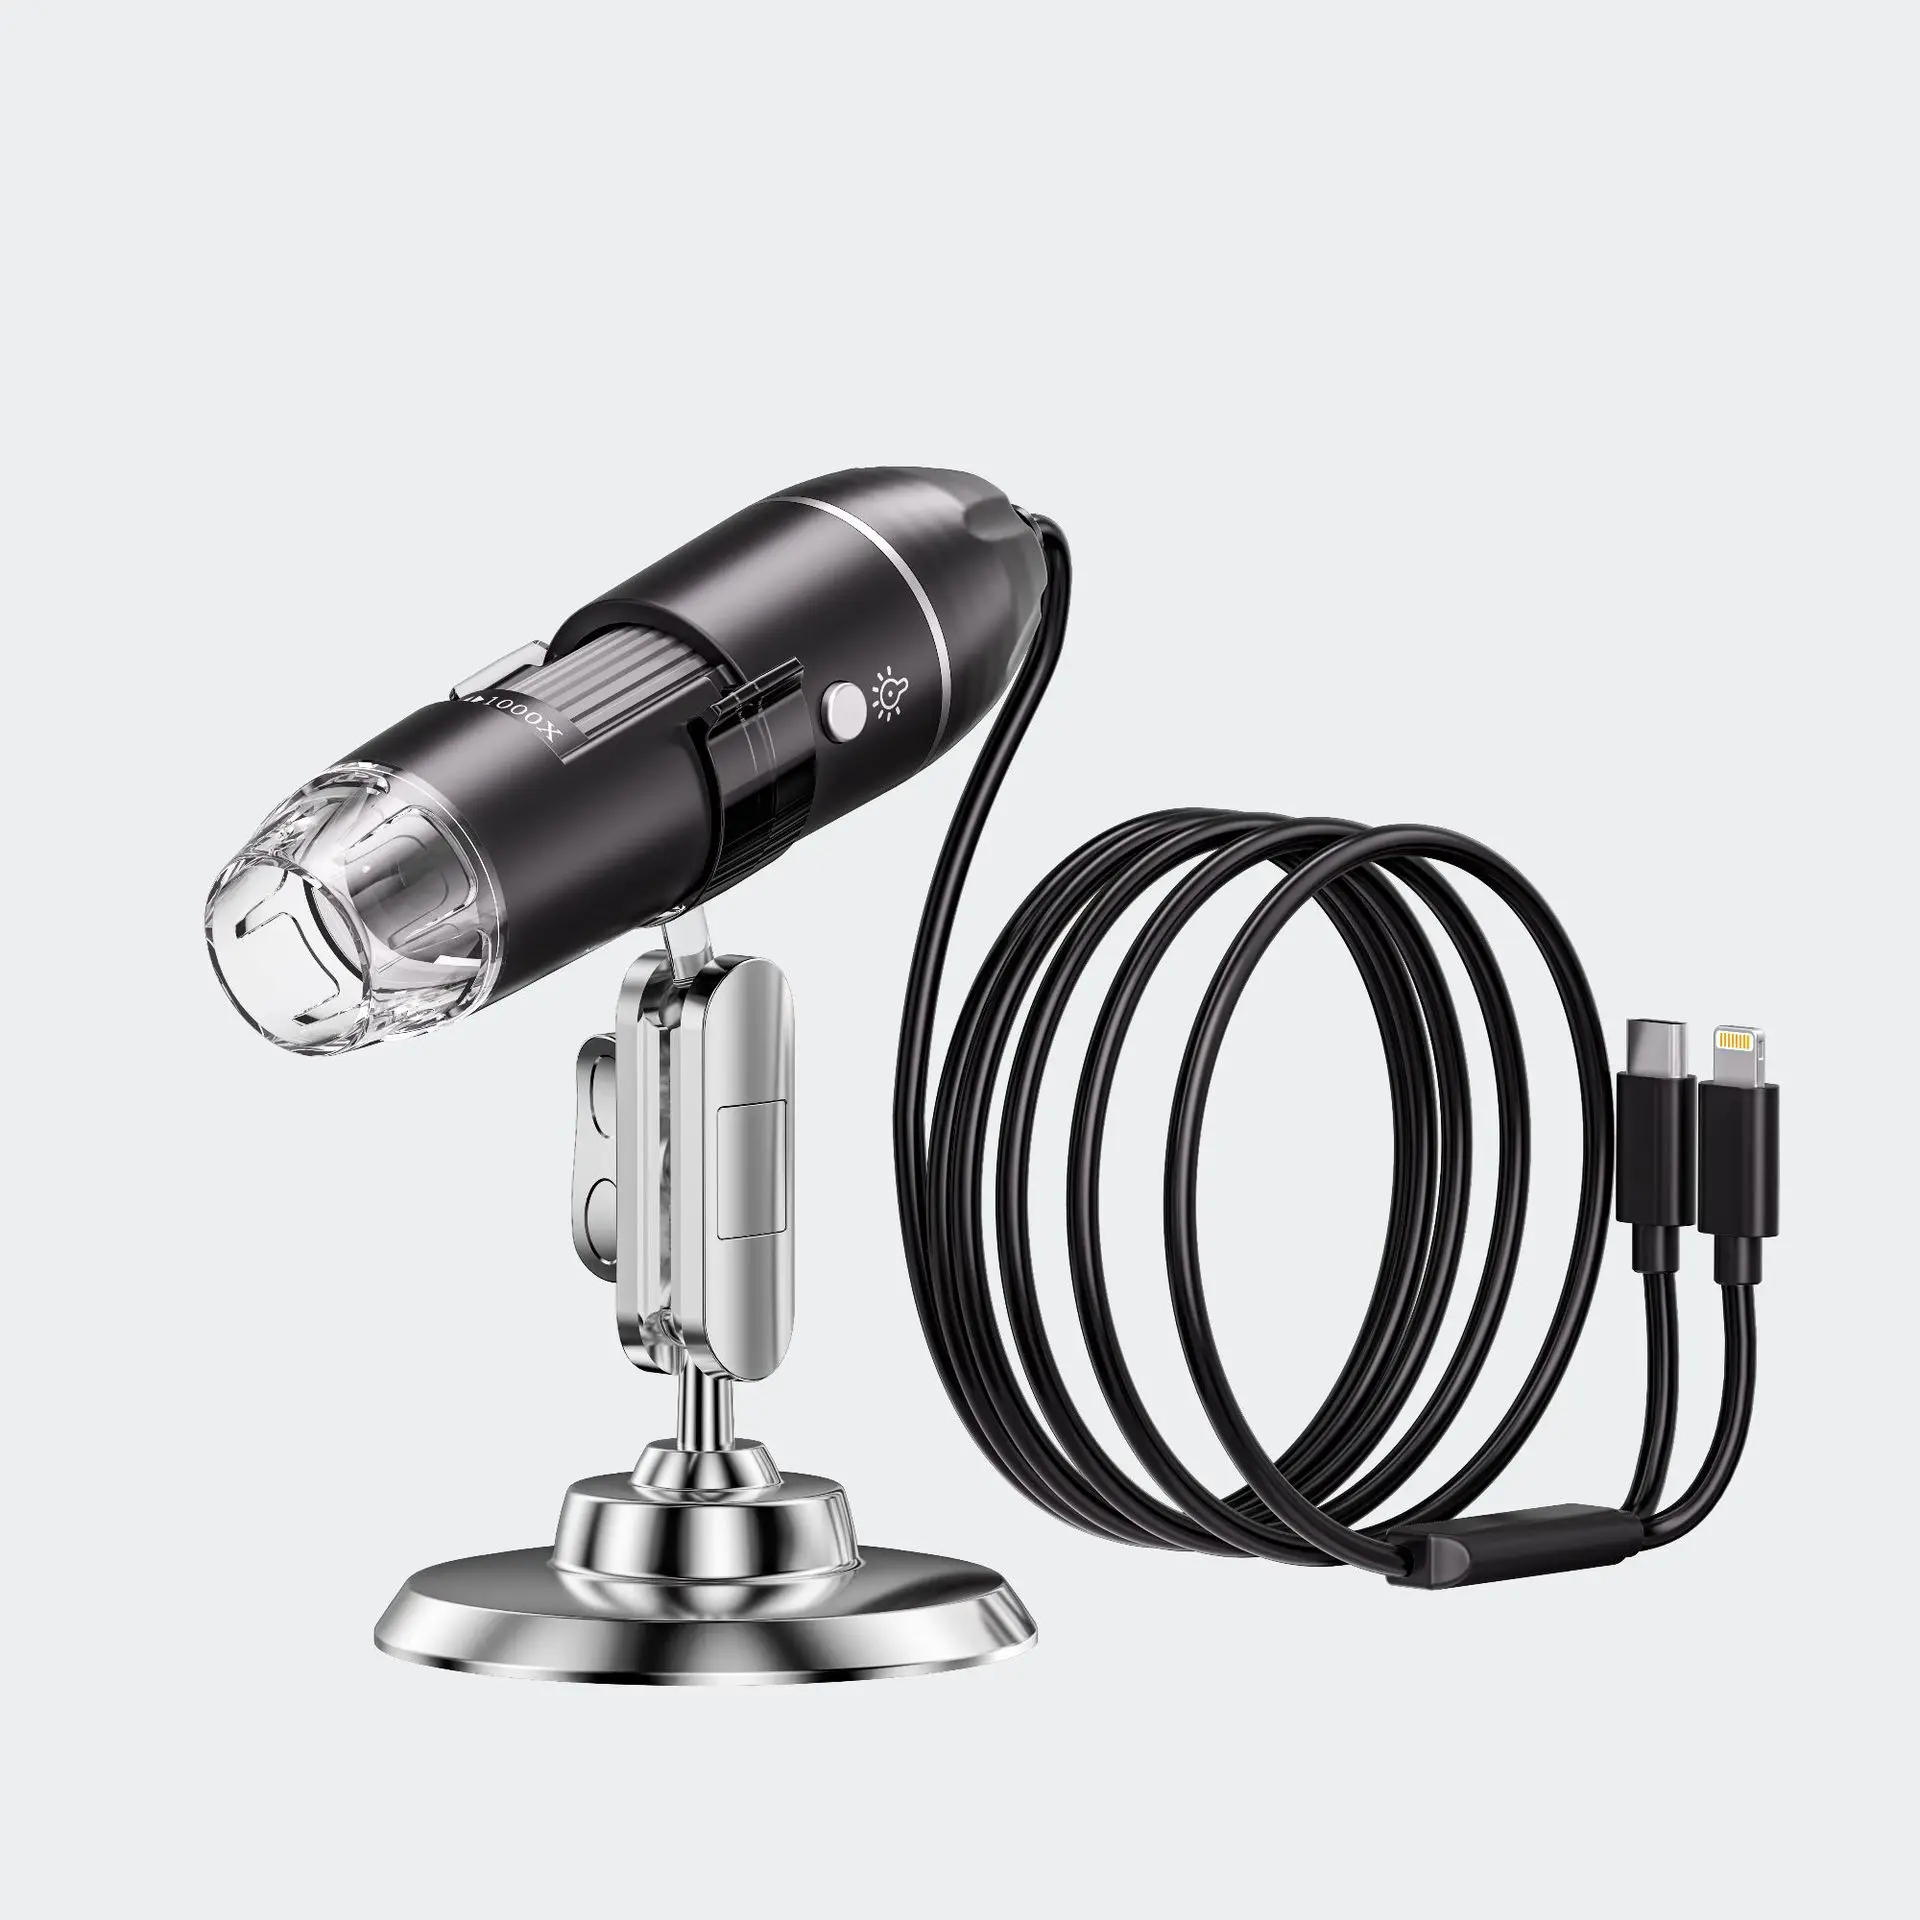 

2MP 2In1 For Android ISO 1000x /1600x OTG USB Digital Microscope Camera Handheld Endoscope CMOS Borescope Inspection Otoscope